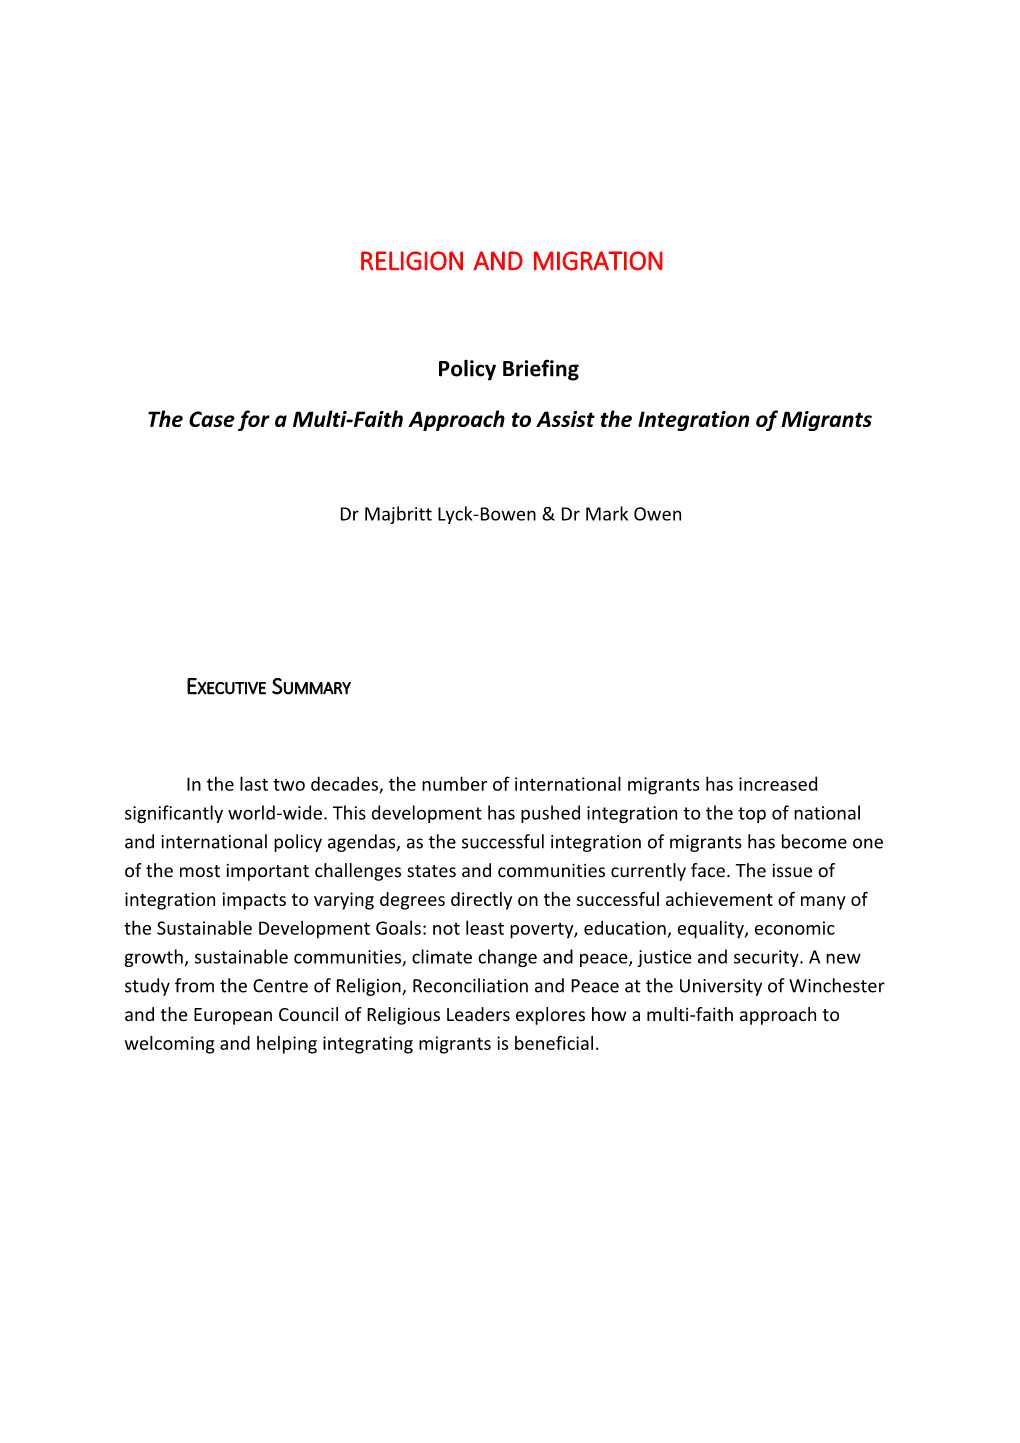 The Case for a Multi-Faith Approach to Assist the Integration of Migrants